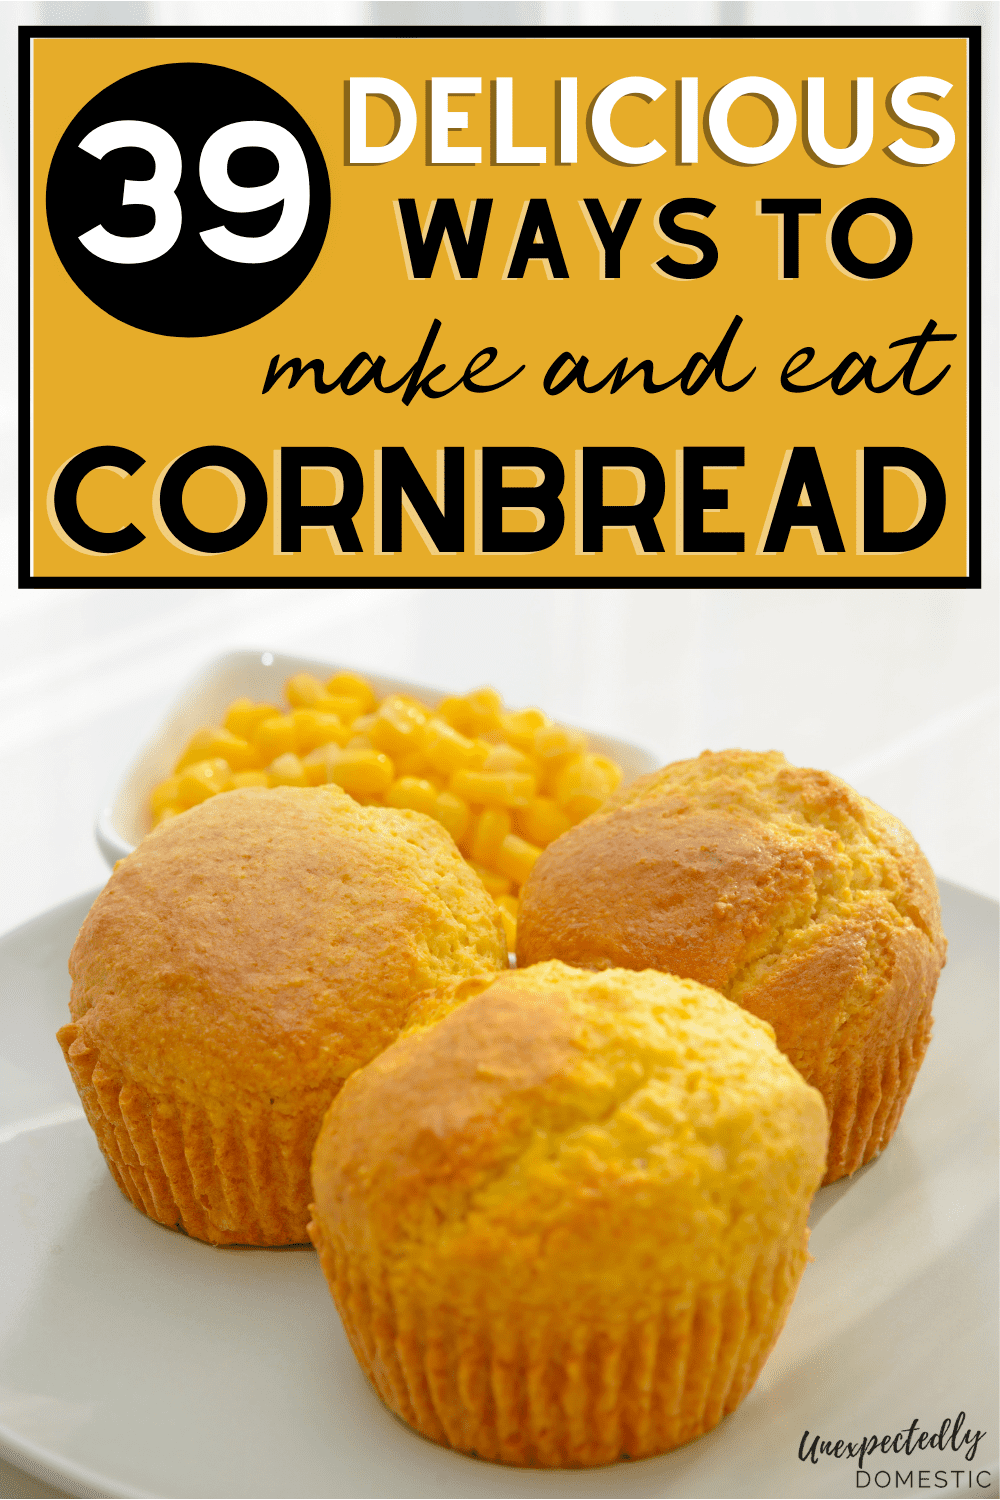 What to eat with cornbread! Here are the best dishes and meals that go with cornbread. It’s not just for chili anymore!